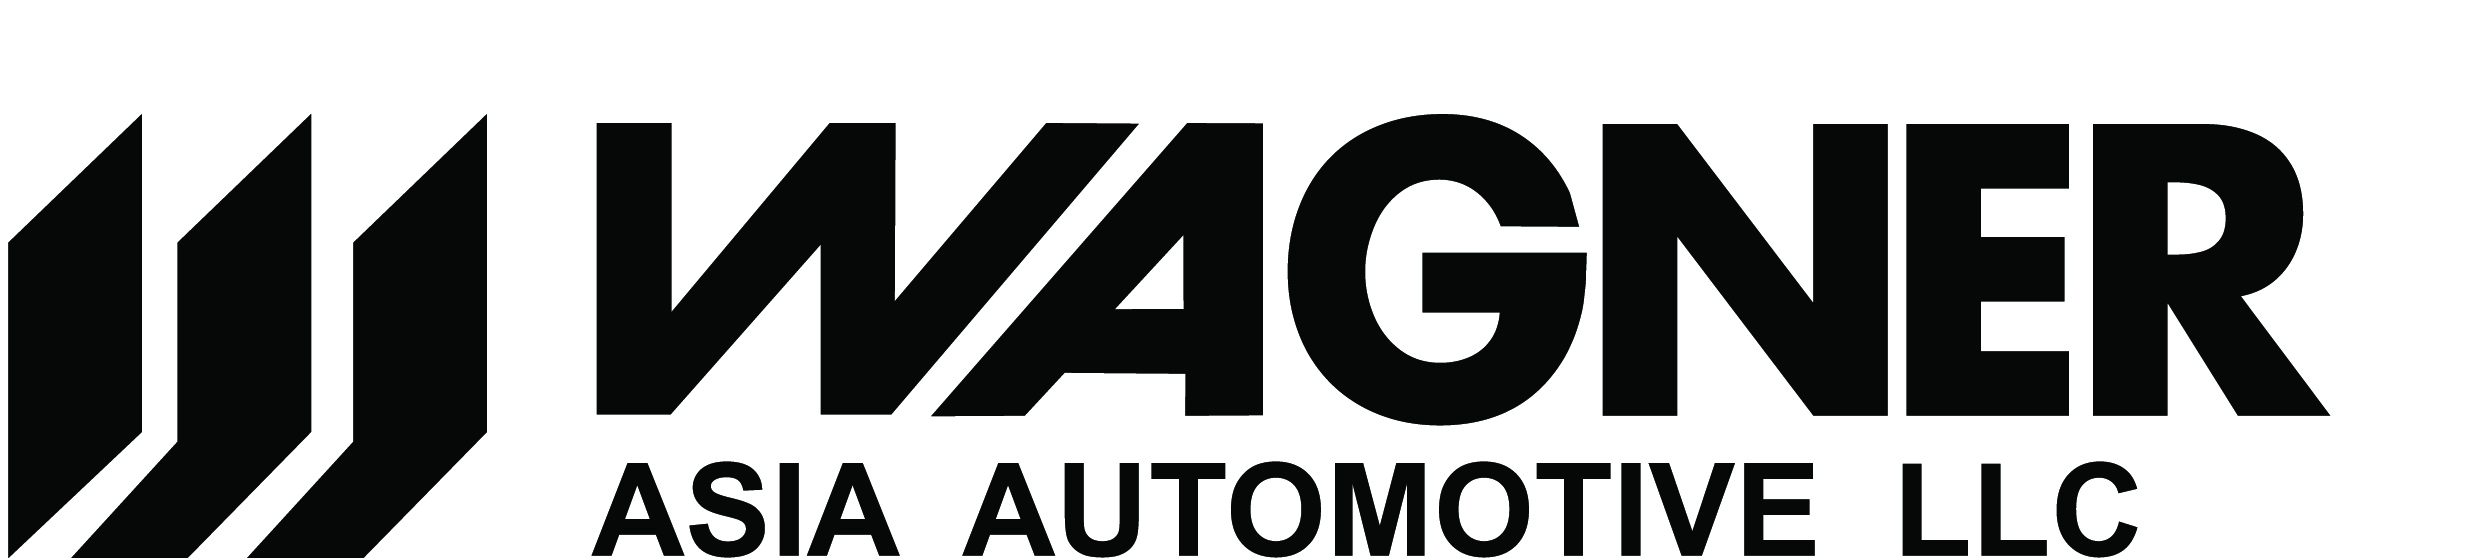 Wagner Asia Automotive